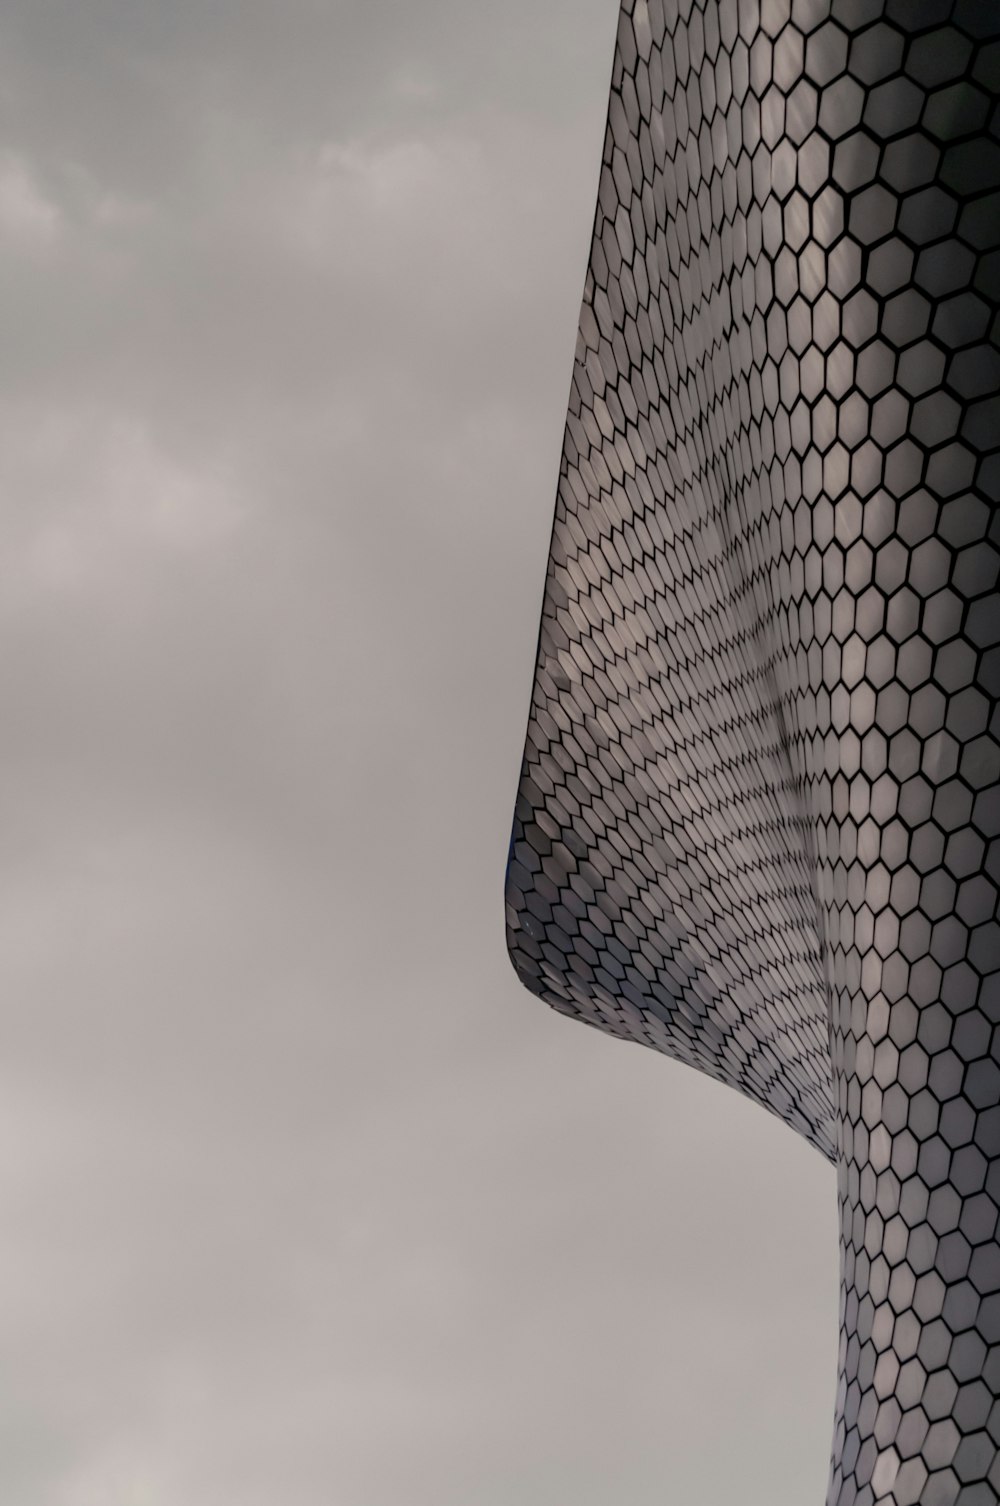 a tall building with a curved roof against a cloudy sky